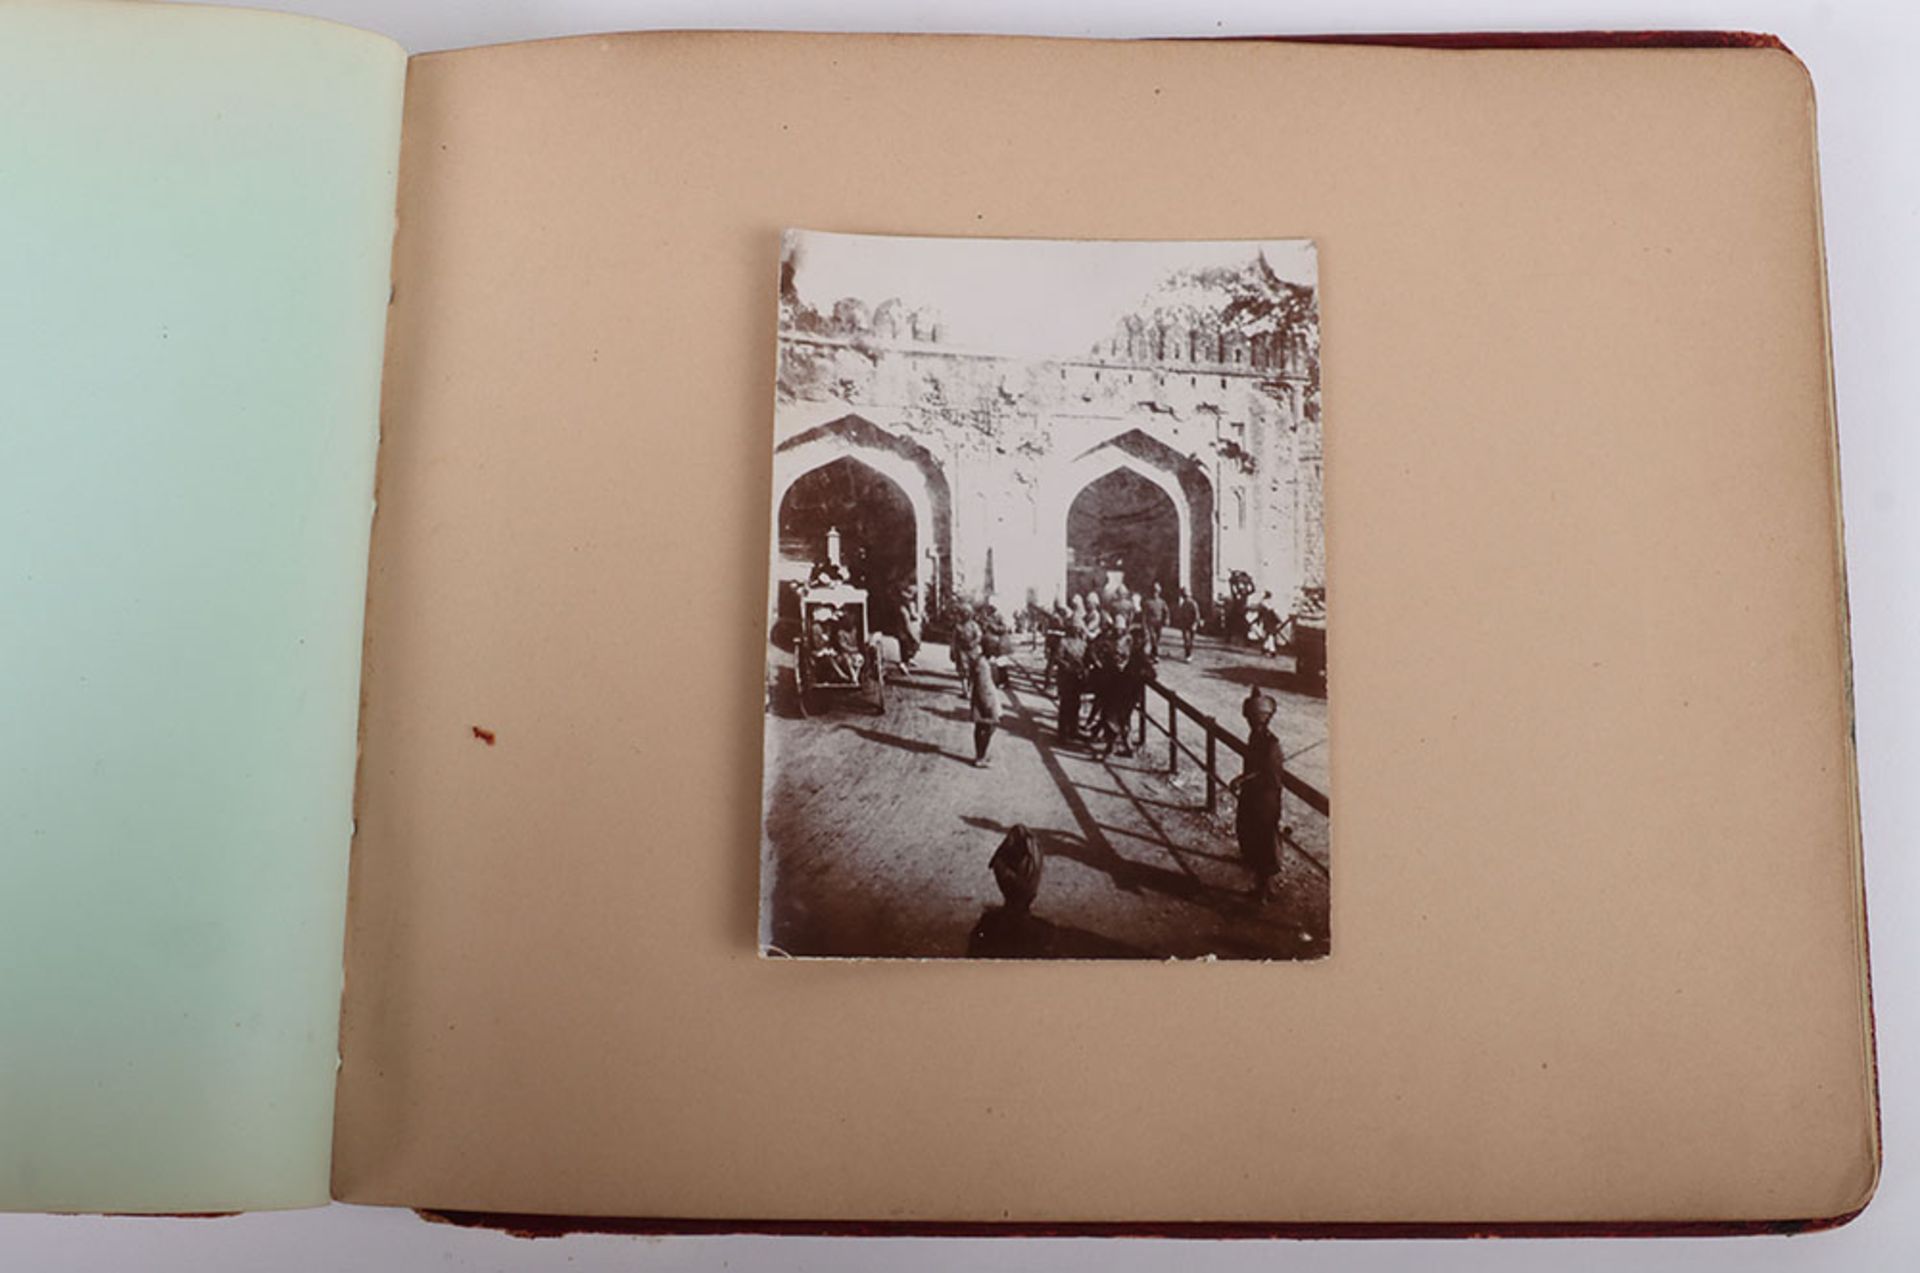 Photograph Album with images of ther Delhi Durbar, troops lining streets, Elephants, sacred cows bel - Image 39 of 48